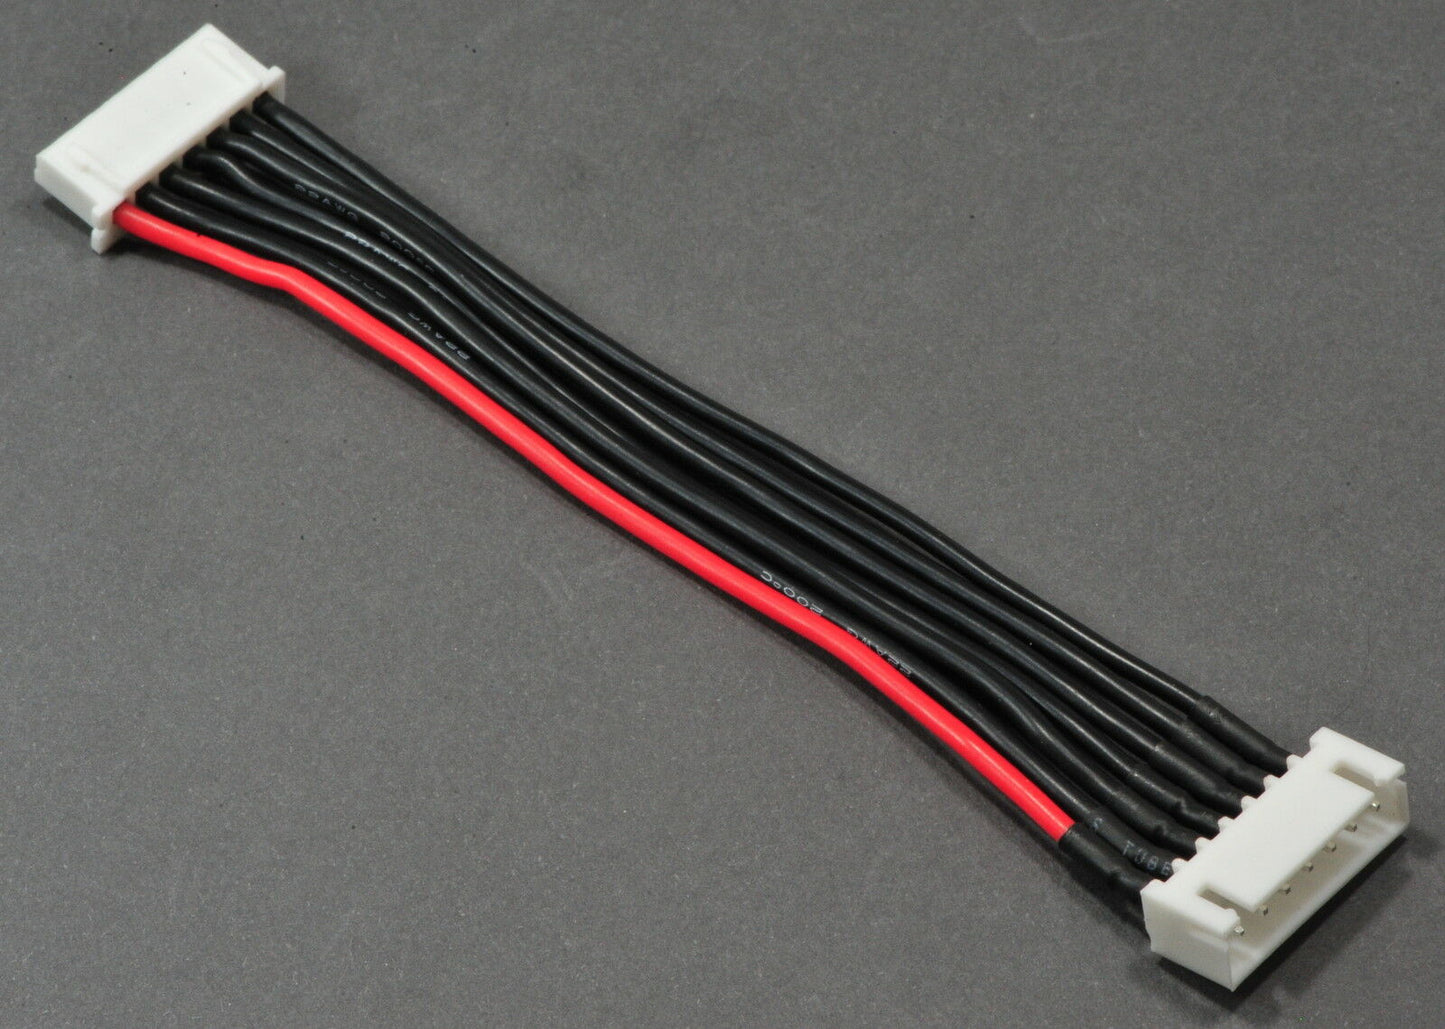 JST-XH Balance Extensions - 10cm 22awg Silicon Wire - 2S - 6S